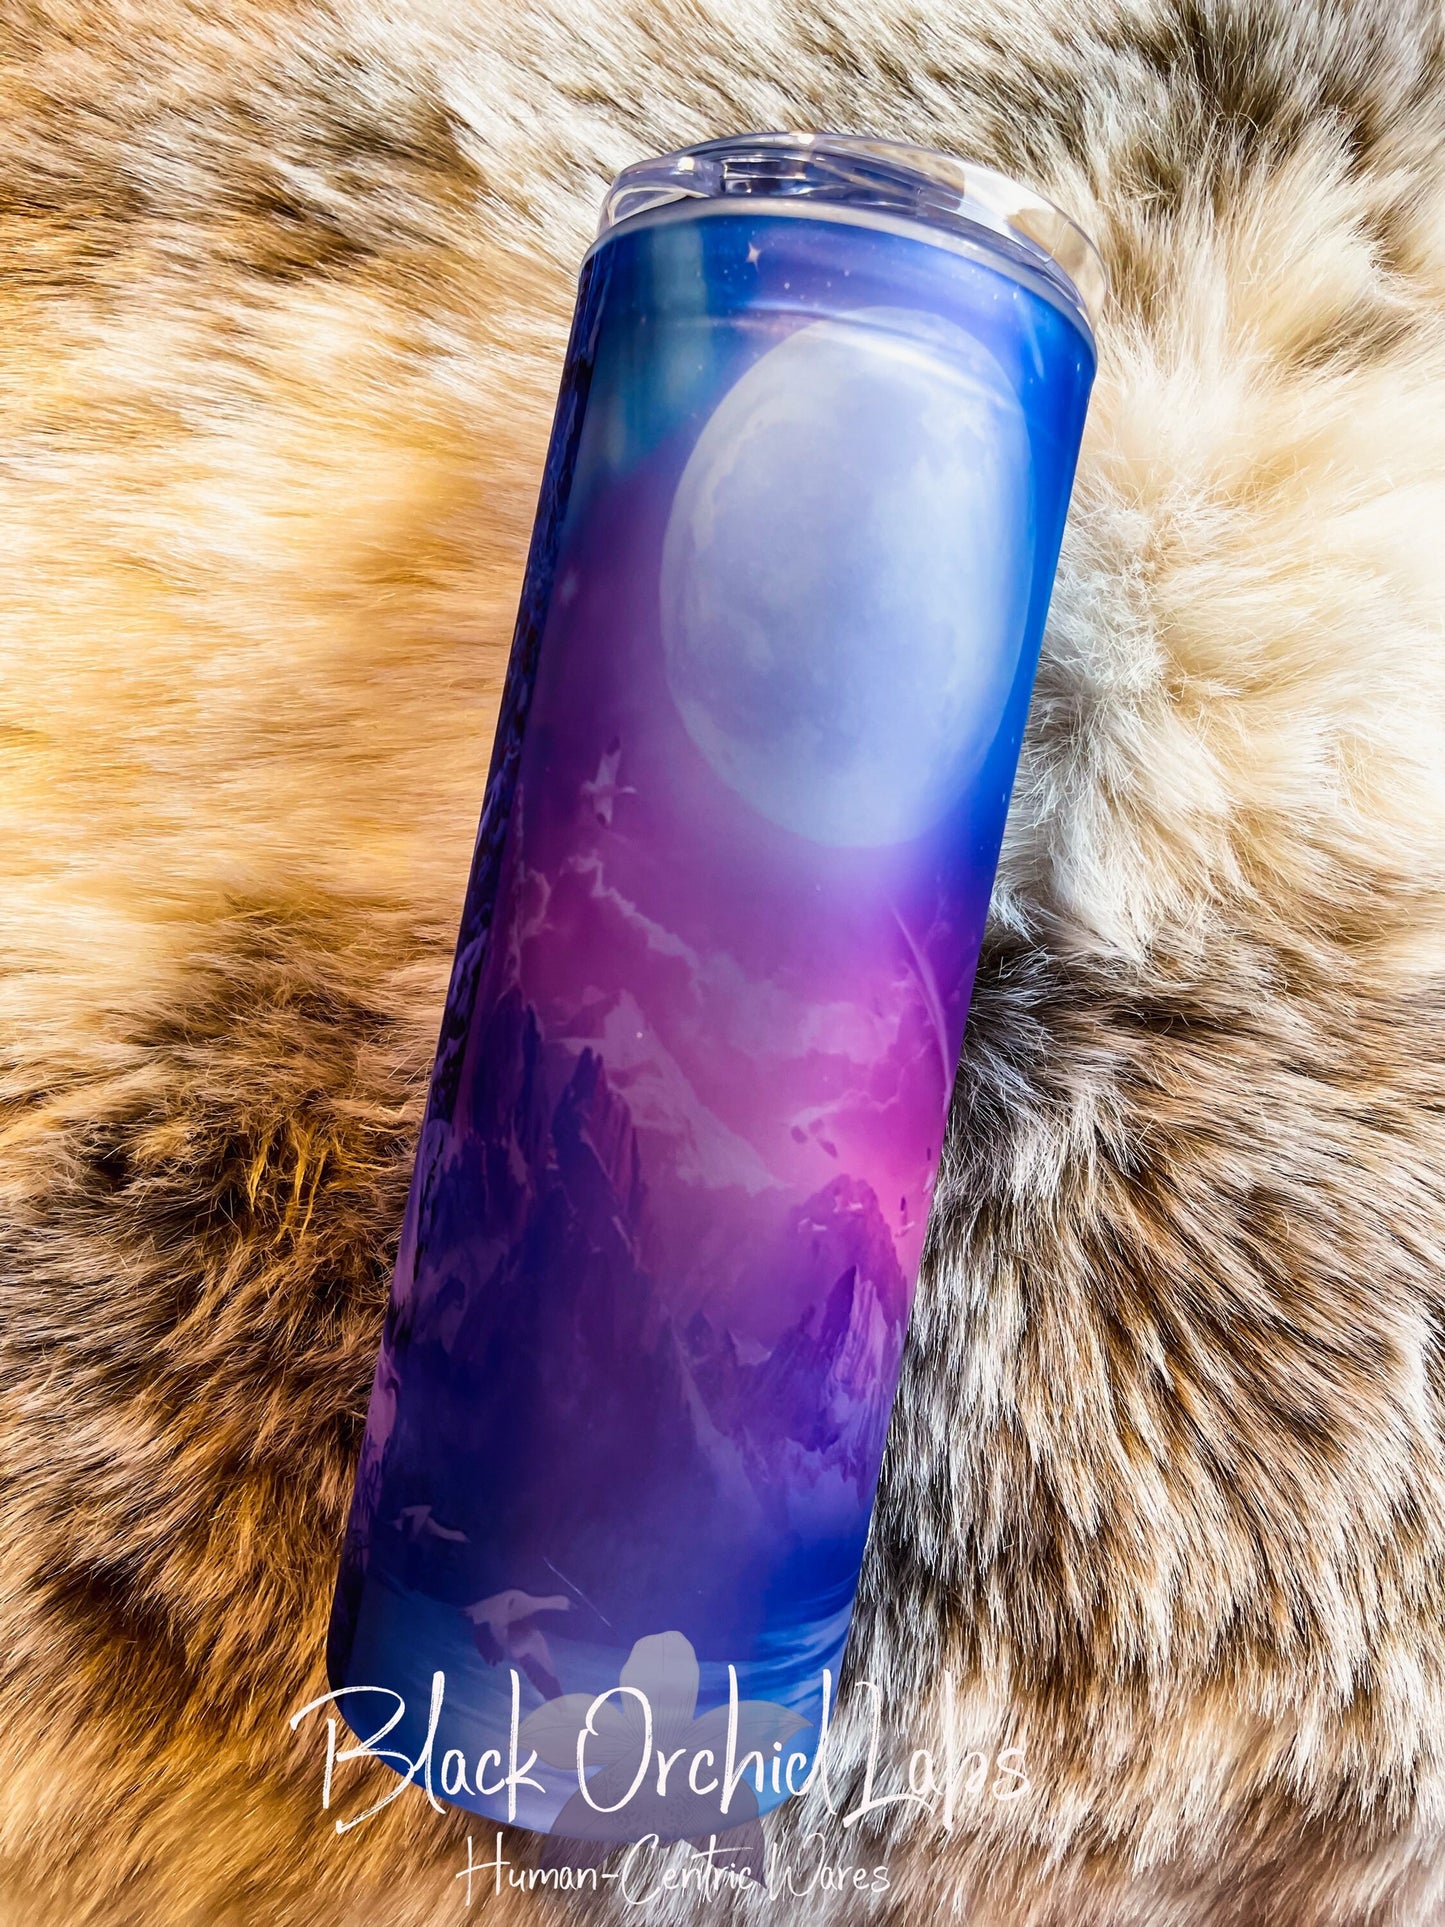 Howling Wolf Tumbler, Lunar wolf travel mug, nature, nature, cottagecore, wolves, gift for her, gift for him, minimalist, wolf gift